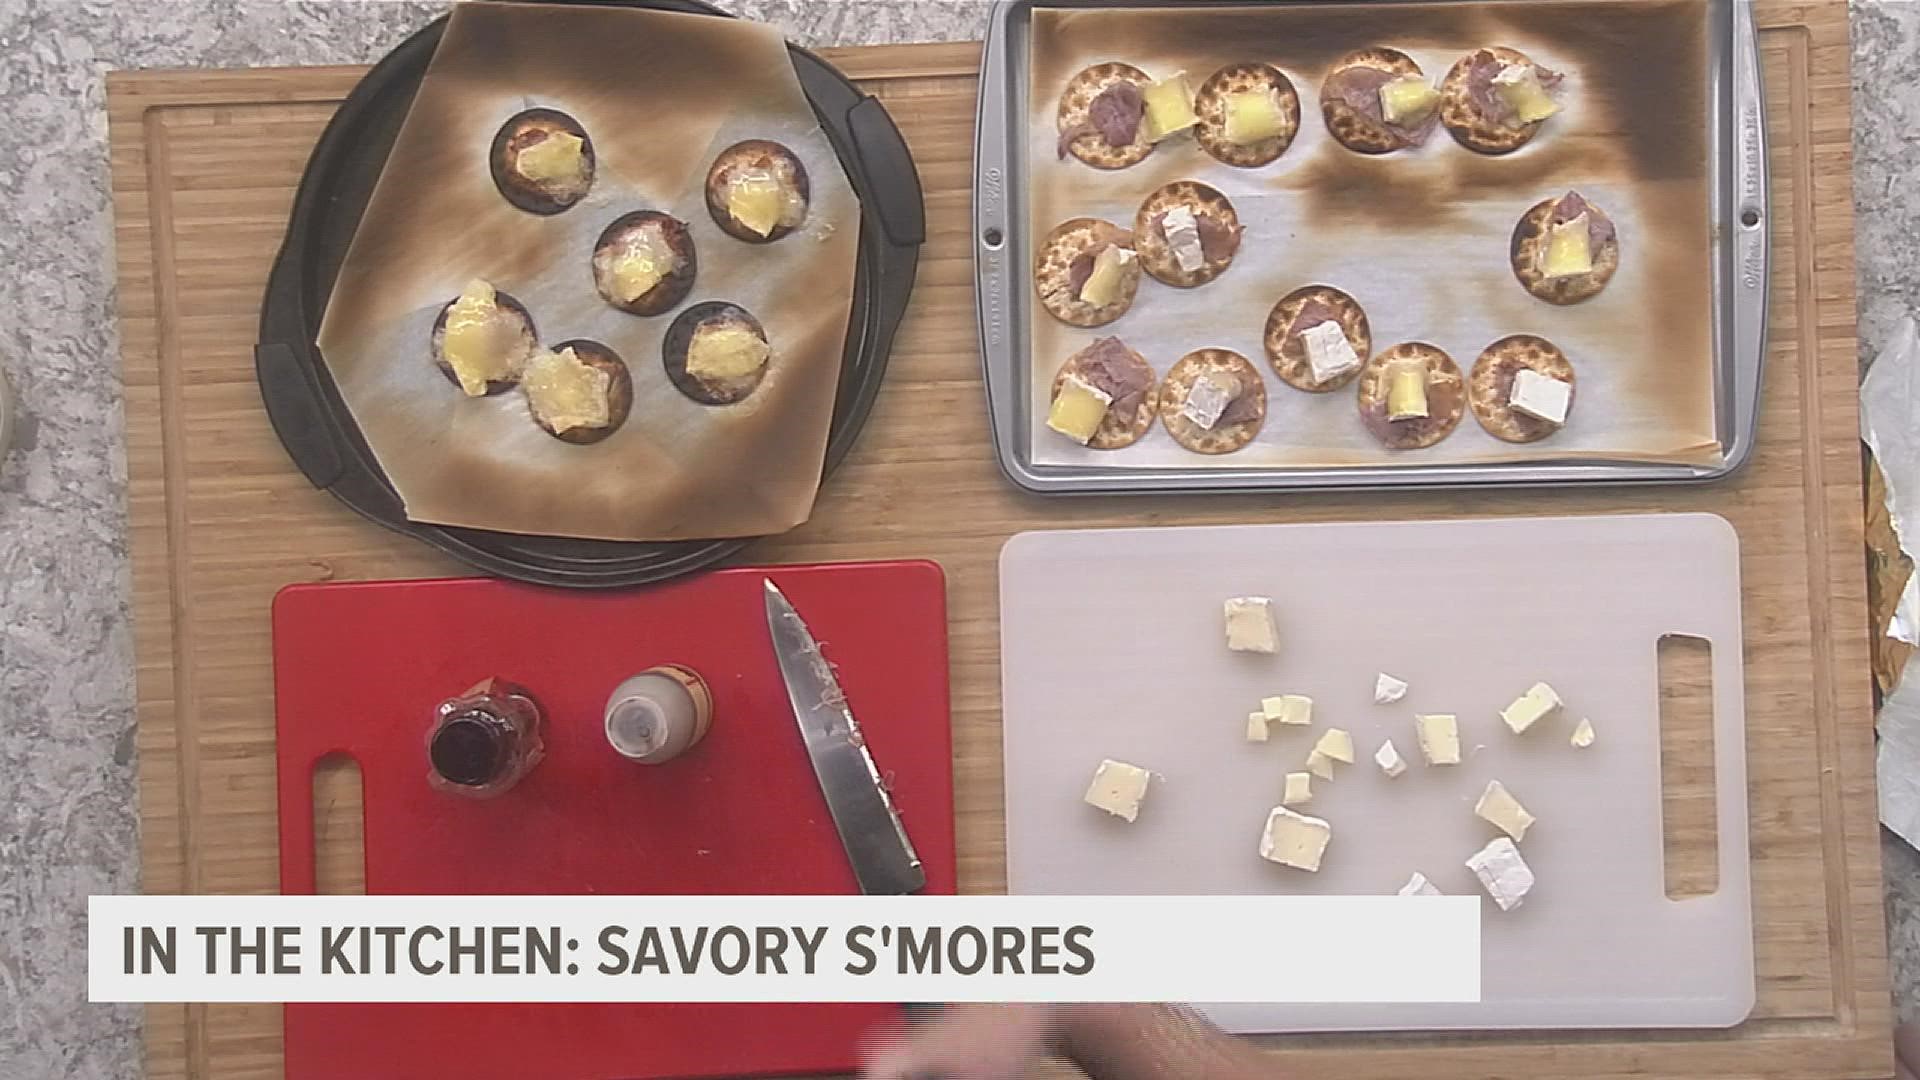 This savory s'more recipe combines crackers, prosciutto, brie and a drizzle of honey and balsamic vinegar.